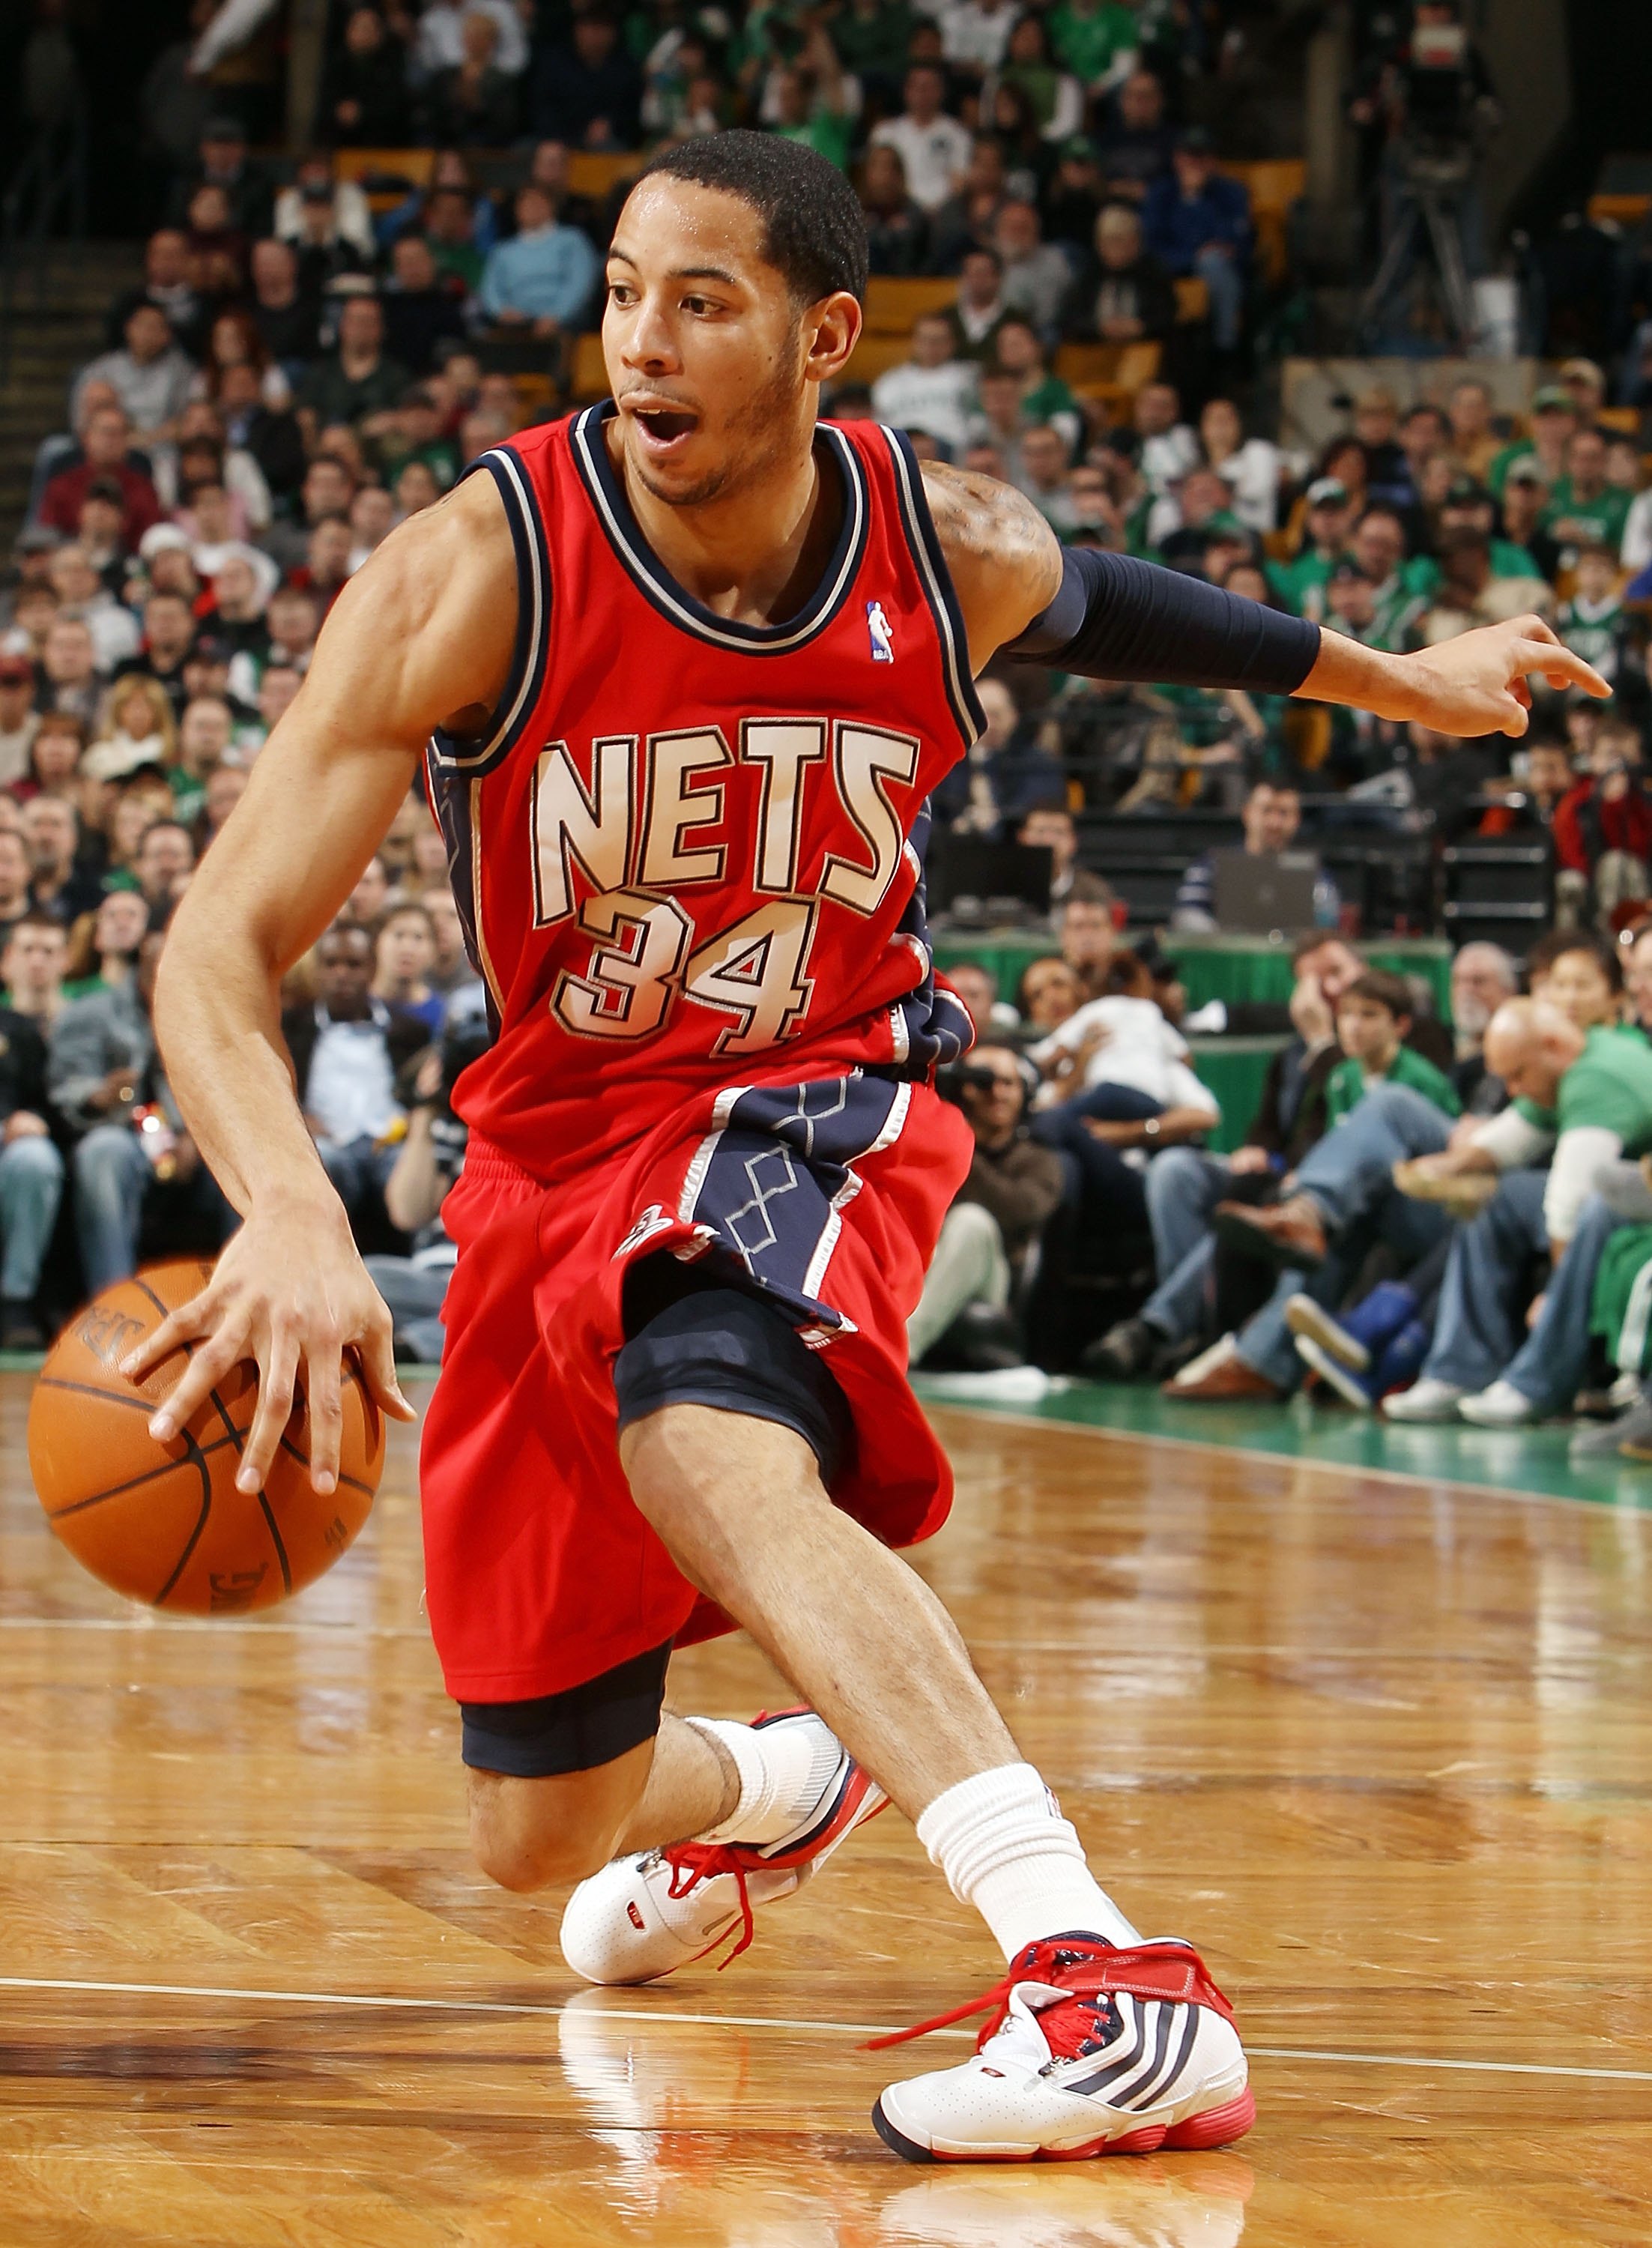 BOSTON - FEBRUARY 27:  Devin Harris #34 of the New Jersey Nets heads to the net in the second half against the Boston Celtics at the TD Garden on February 27, 2010 in Boston, Massachusetts. The Nets defeated the Celtics 104-96.  NOTE TO USER: User express